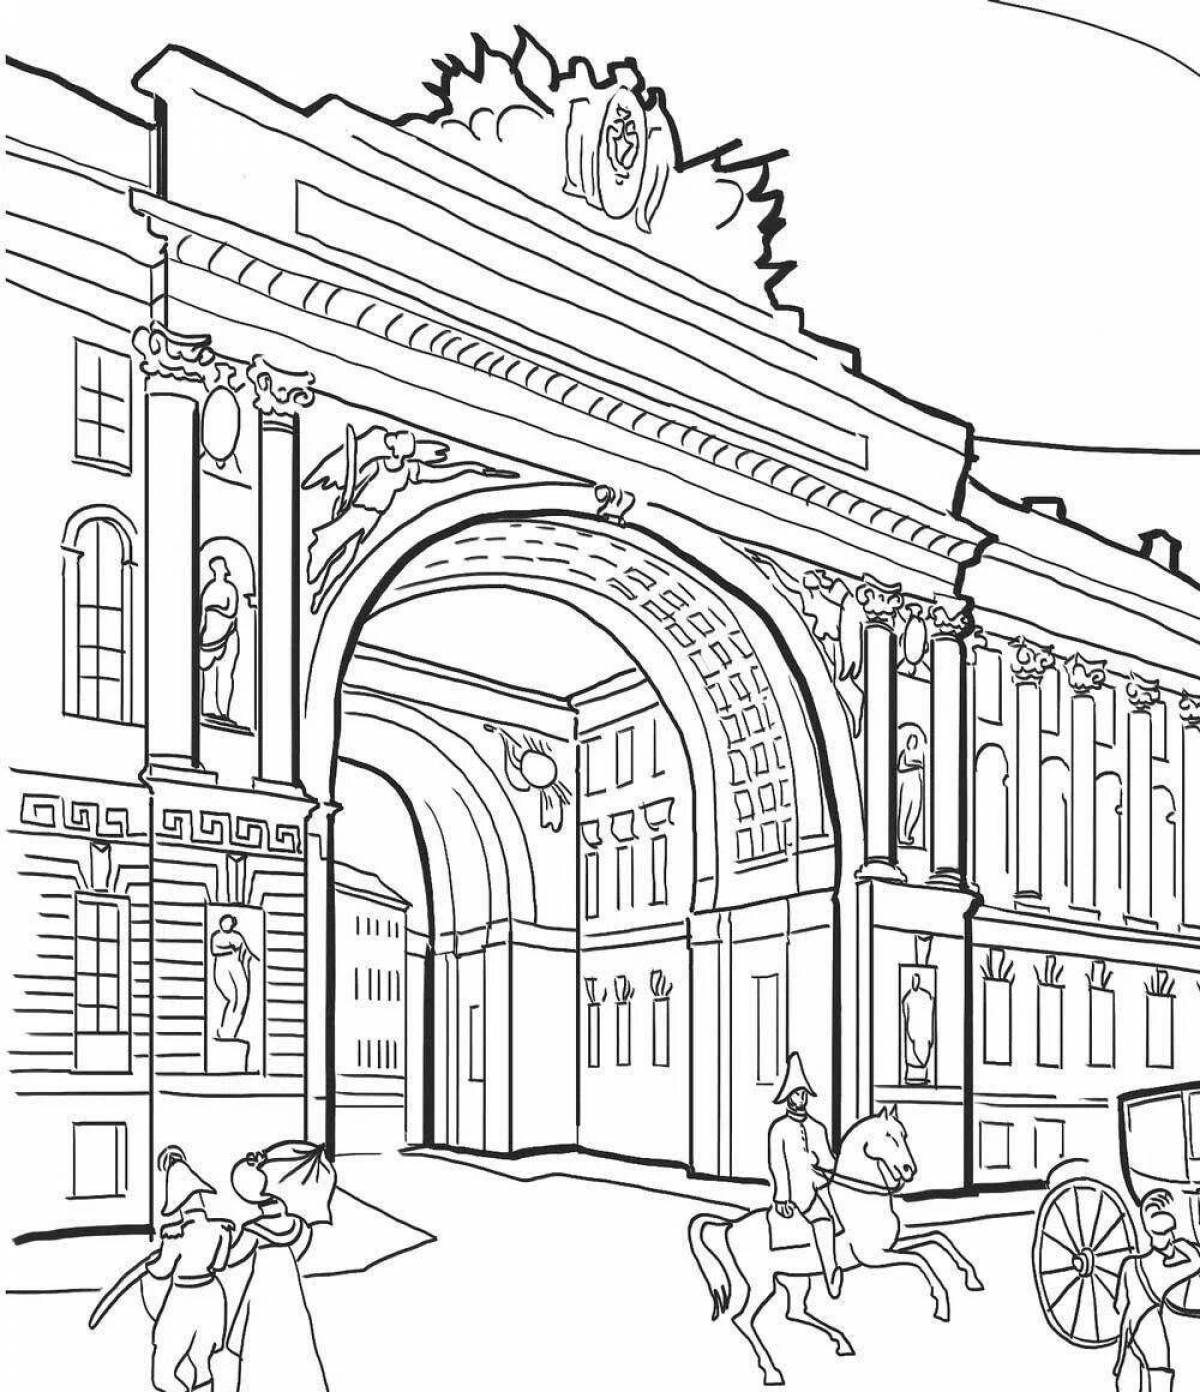 Amazing coloring pages of st. petersburg sights